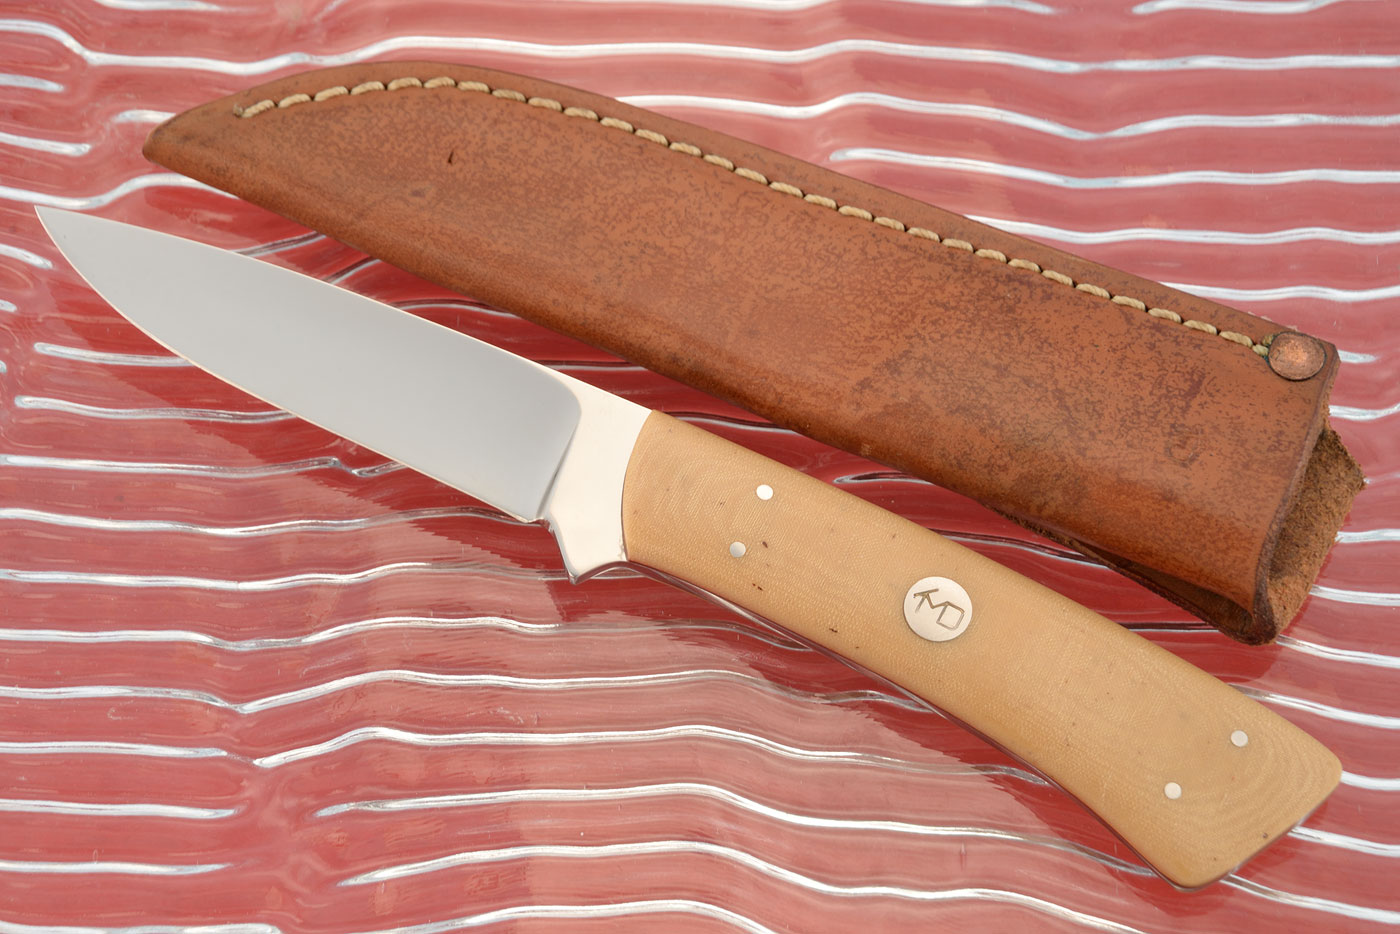 The Dowell Knife with Vintage Micarta